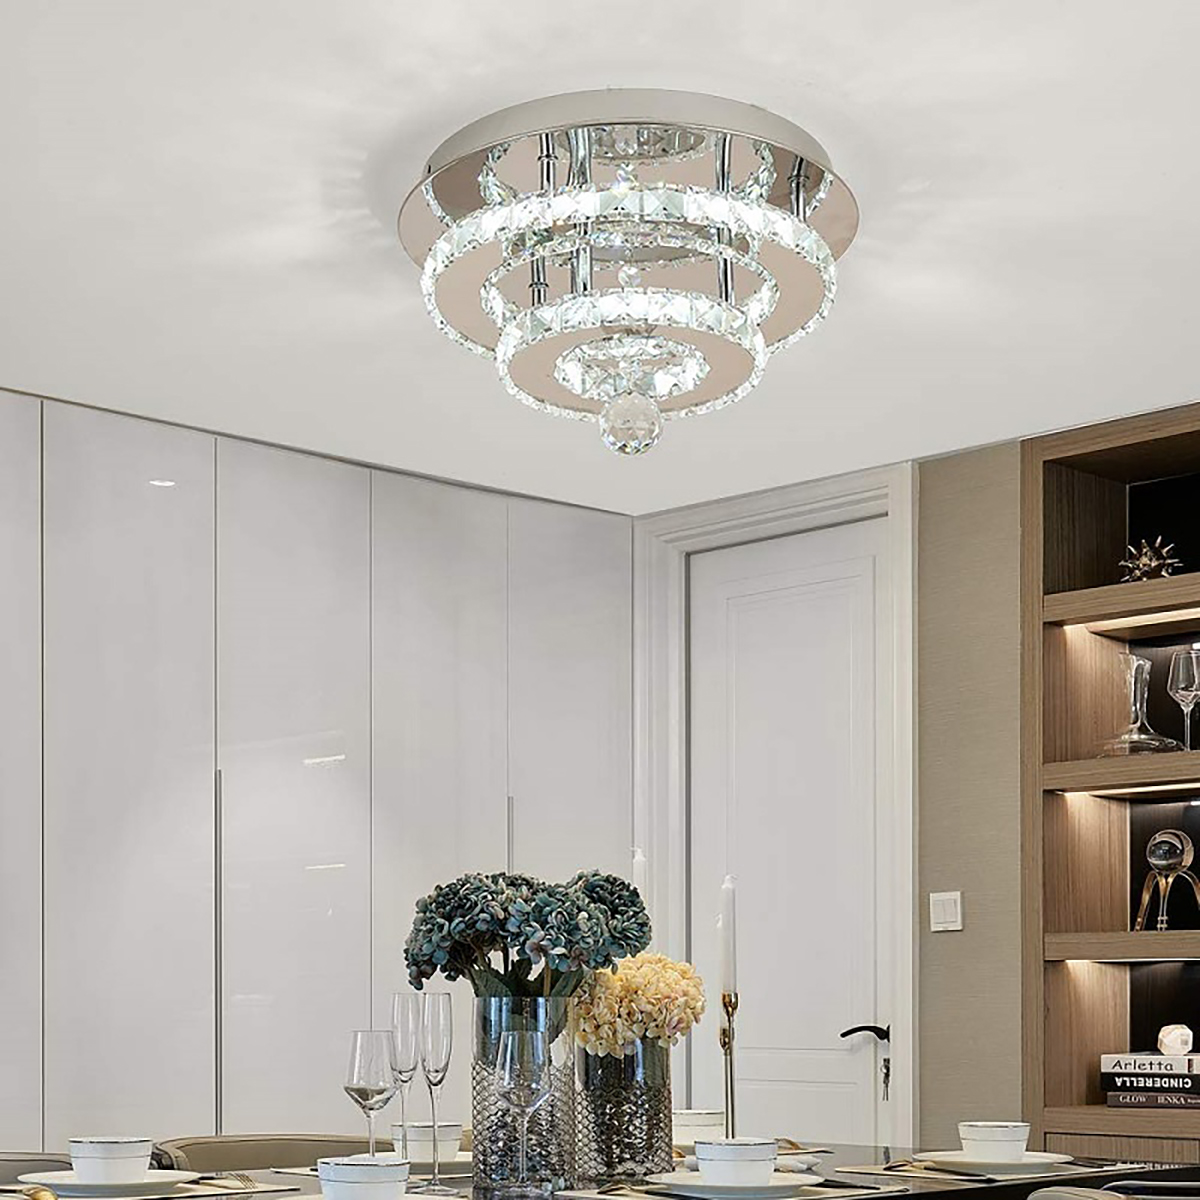 SINGES 2 Rings Modern Crystal Ceiling Light Flush Mounted, 12 inch LED Chandelier Pendant Linghting Fixtures Home Decor - image 2 of 6